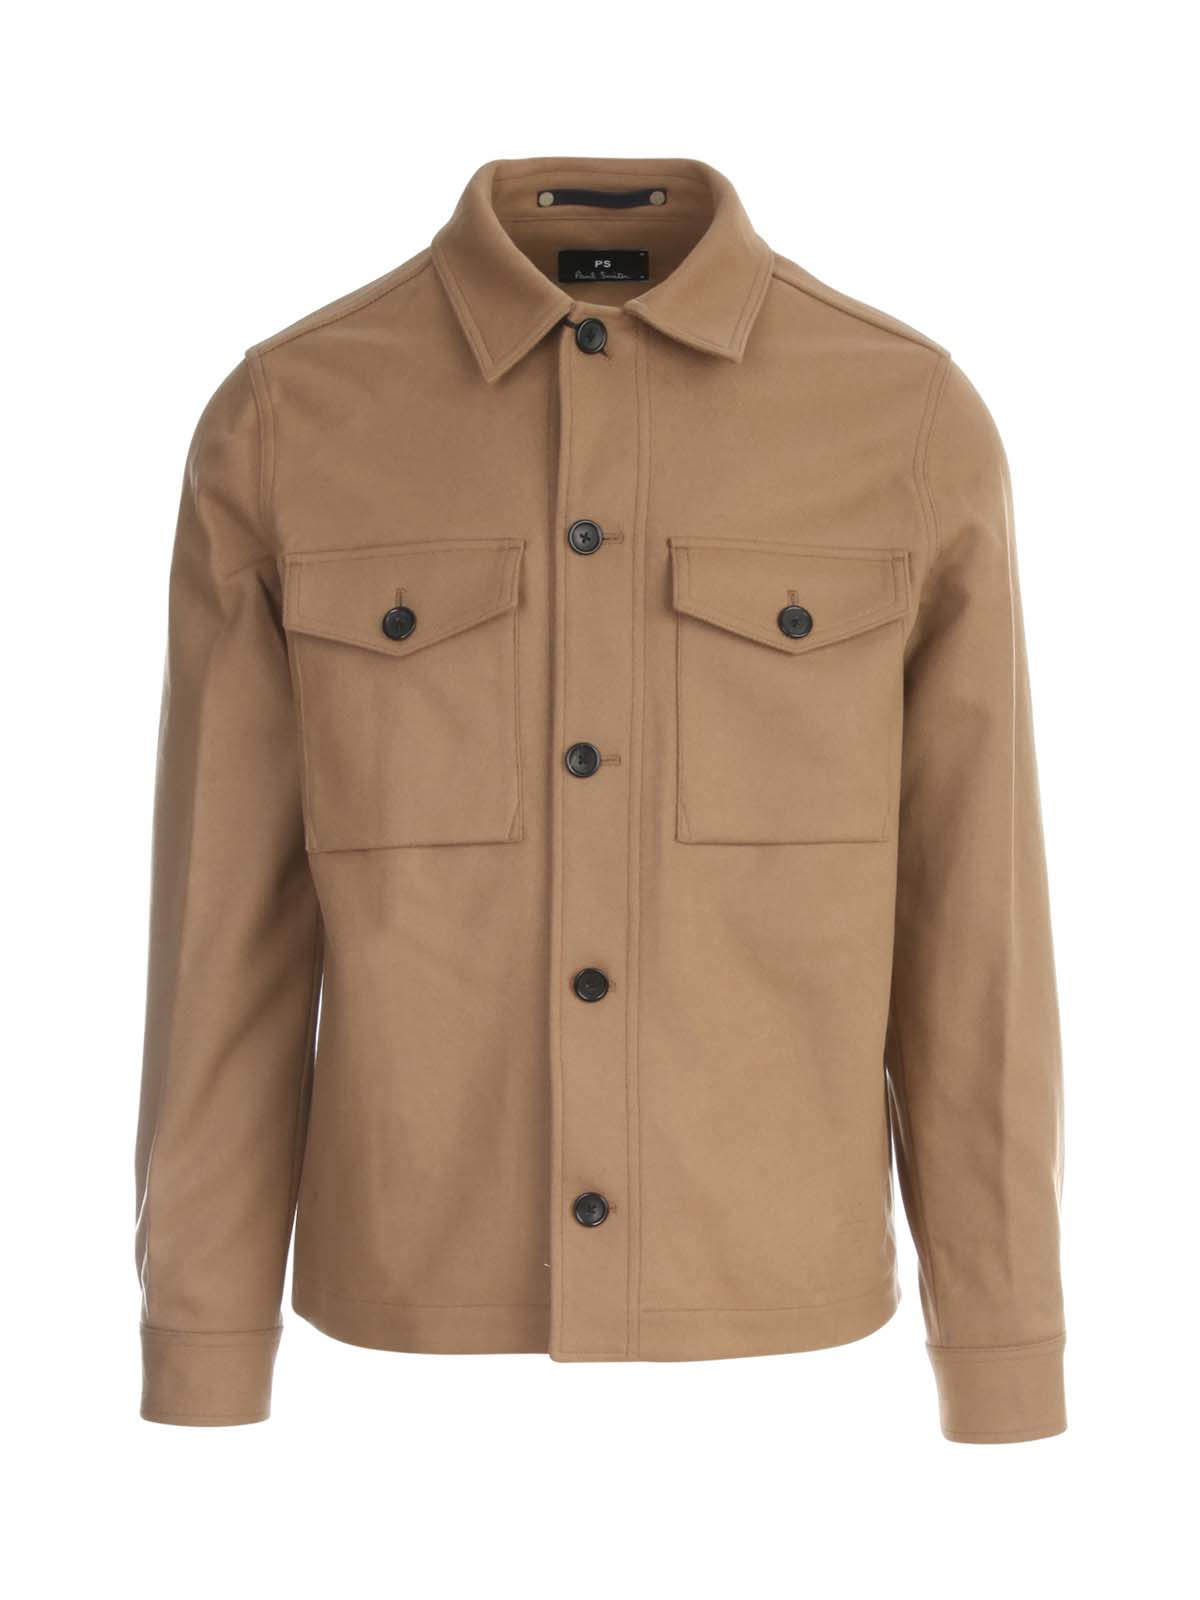 PS by Paul Smith Mens Military Overshirt